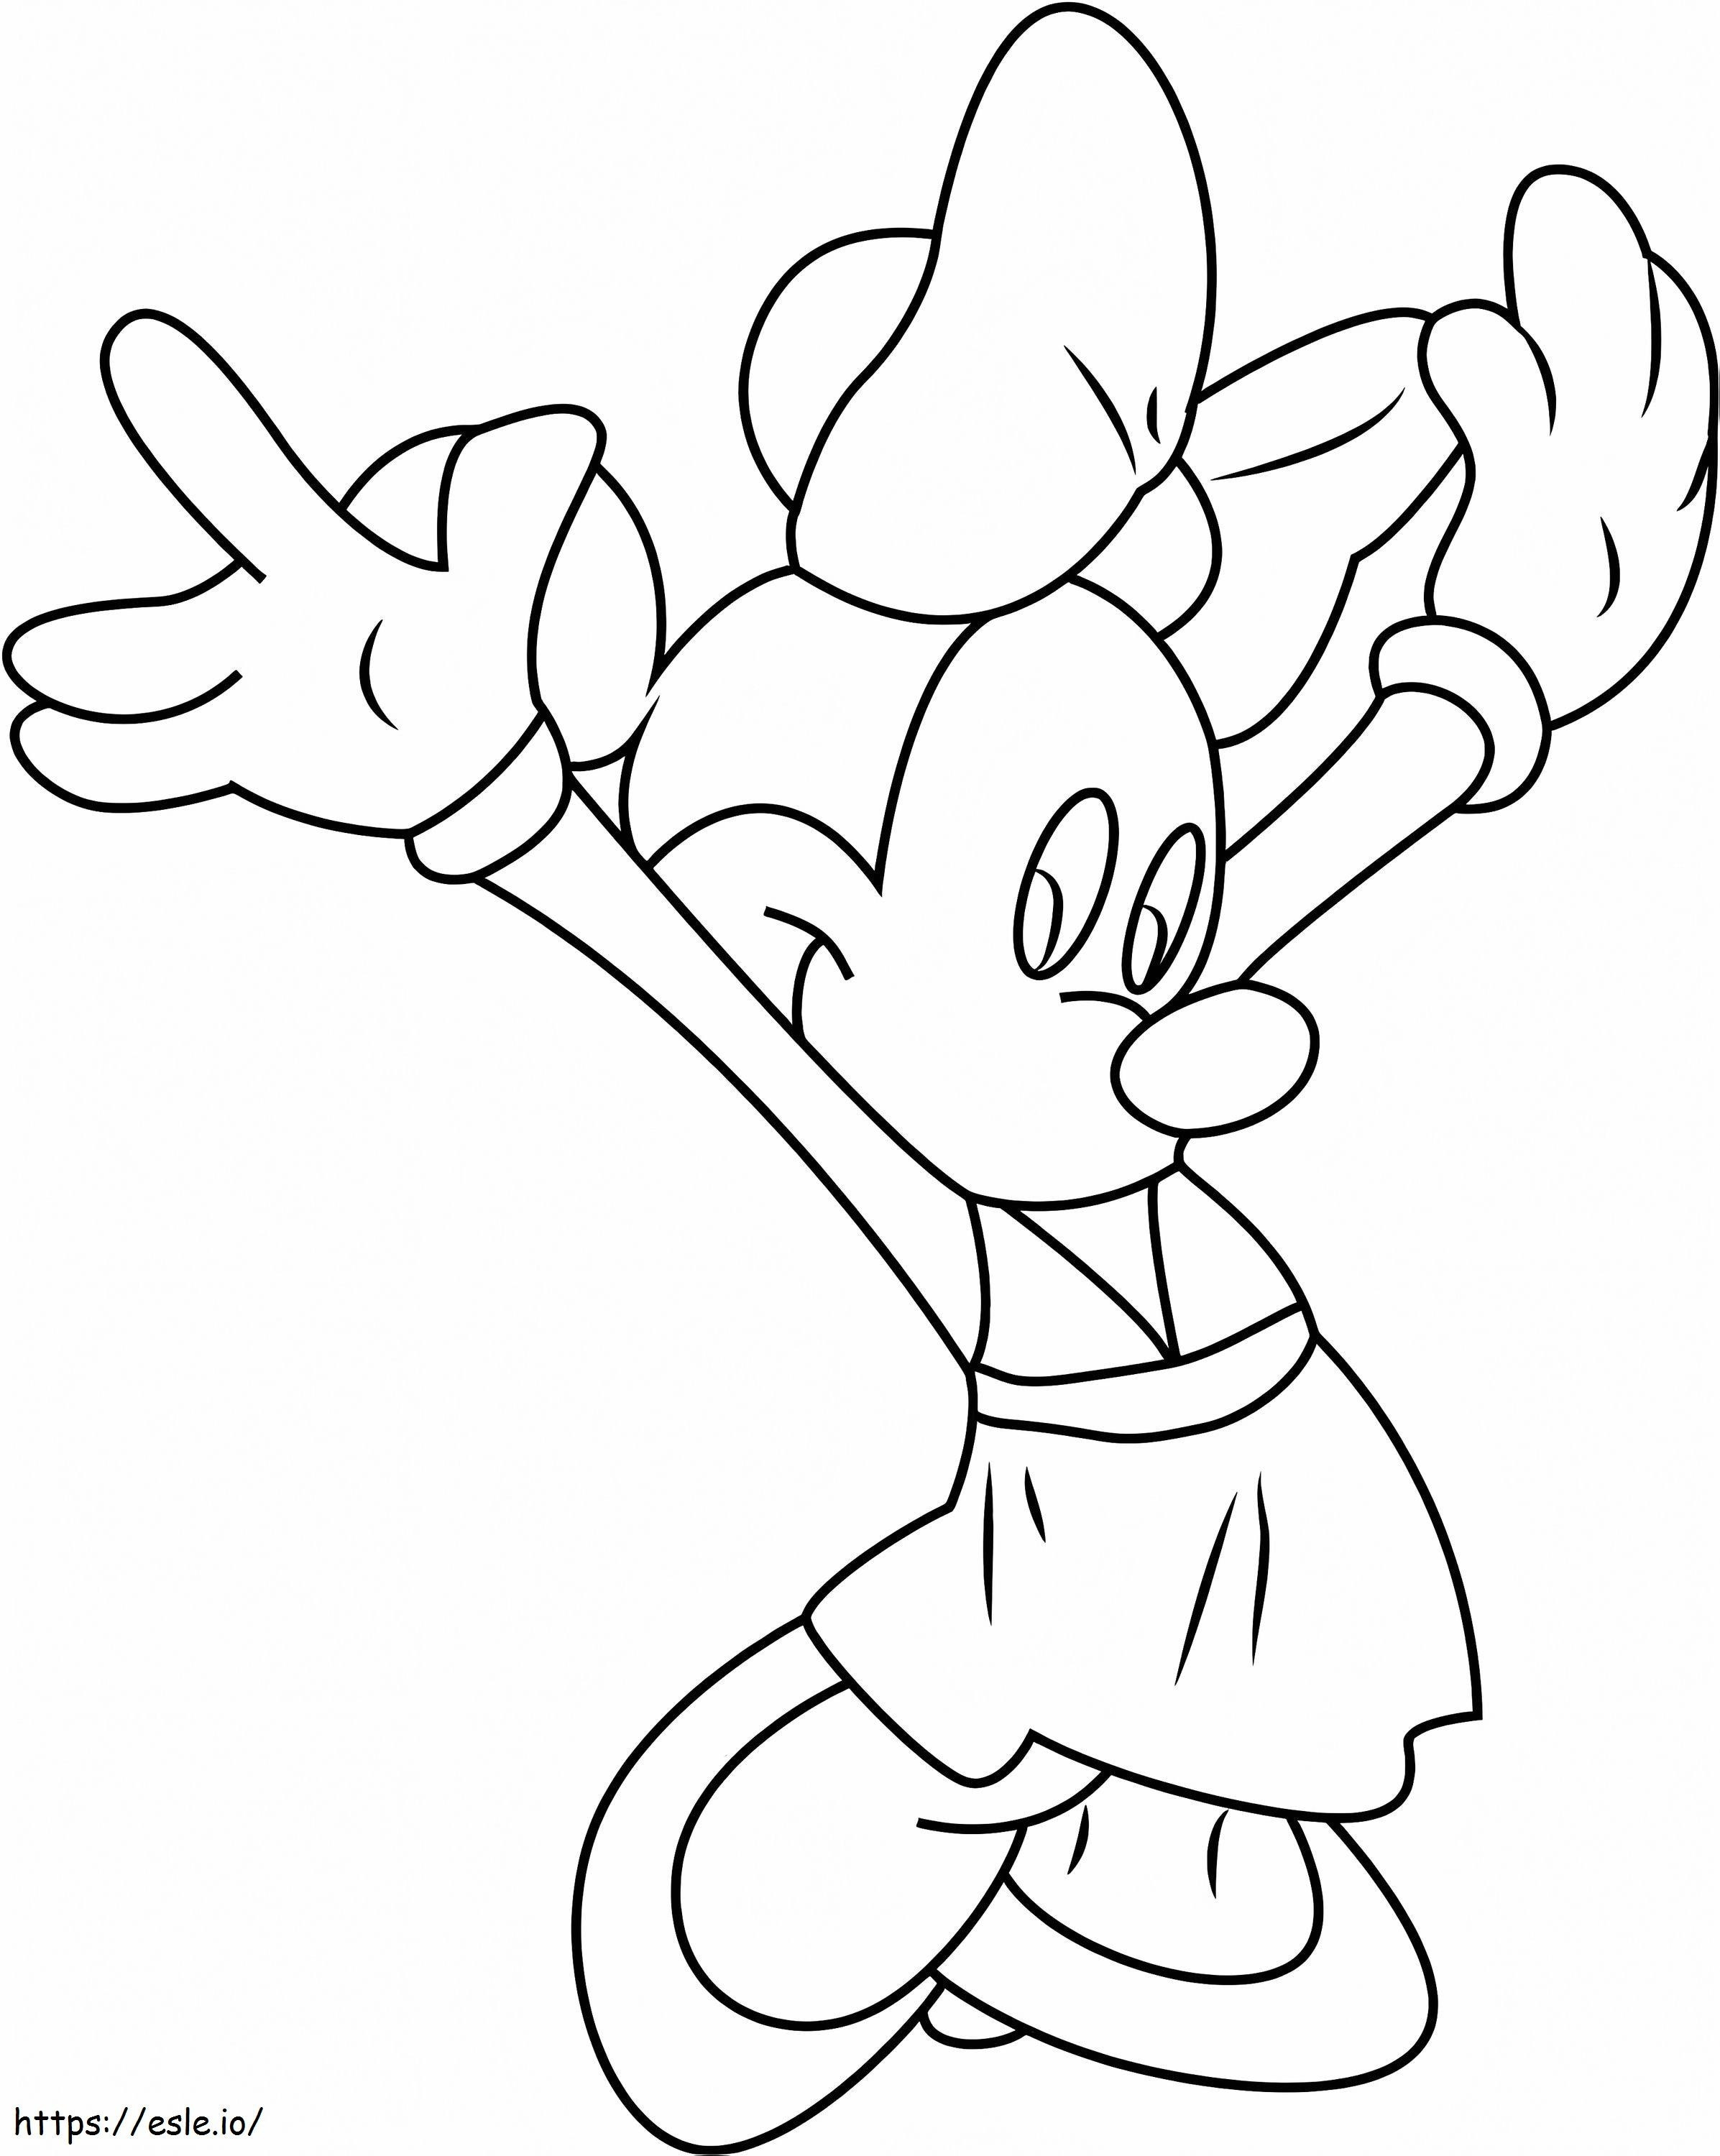 Minnie Mouse 4 coloring page